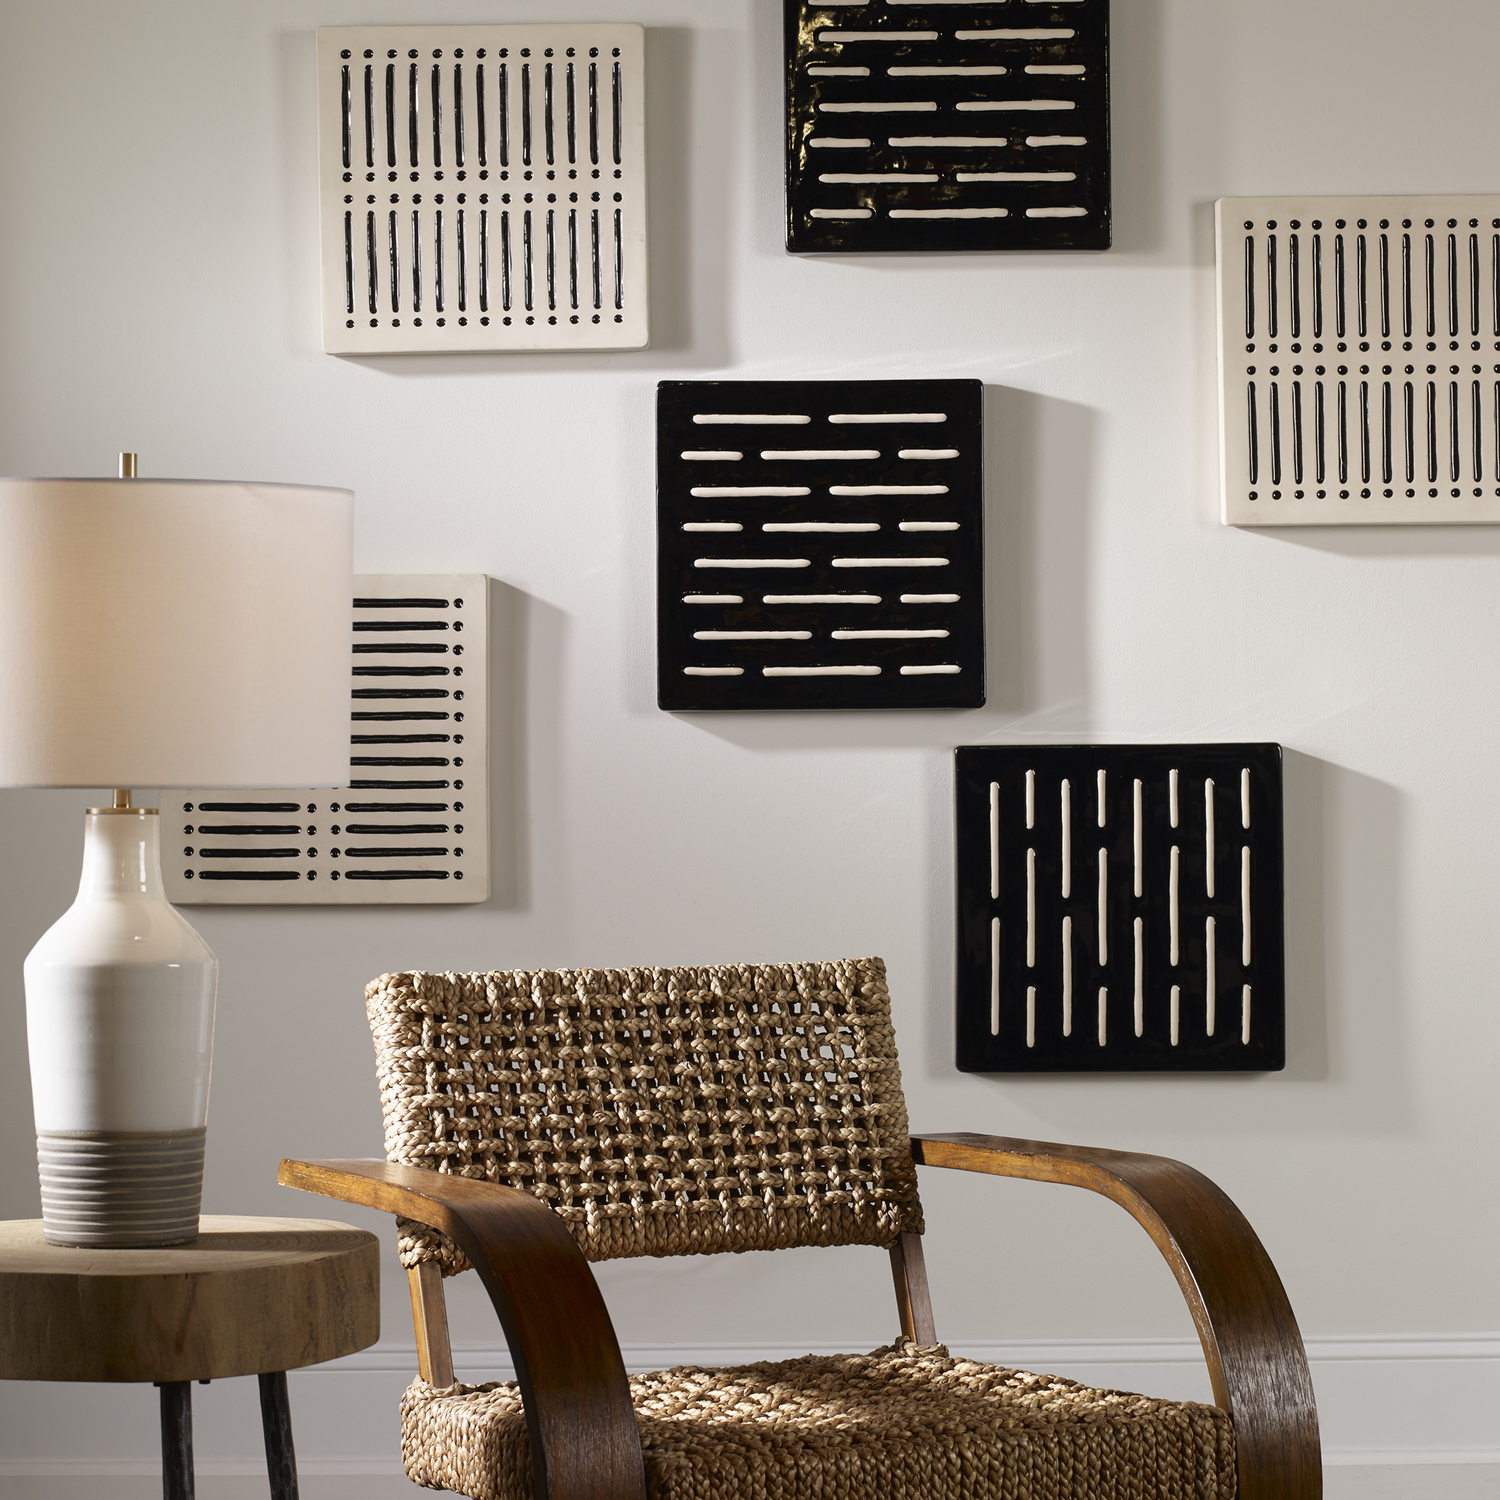 cool art for home Uttermost Modern Wall Art Update Your Space With These Modern Earthenware Wall Squares. Each Are Glazed In An Inverse Matte Ivory And Gloss Black Palette With Noticeable Scandinavian Style Influence. Each Panel May Be Hung Horizontal Or Vertical, Allowing Multiple Wall Design Options.